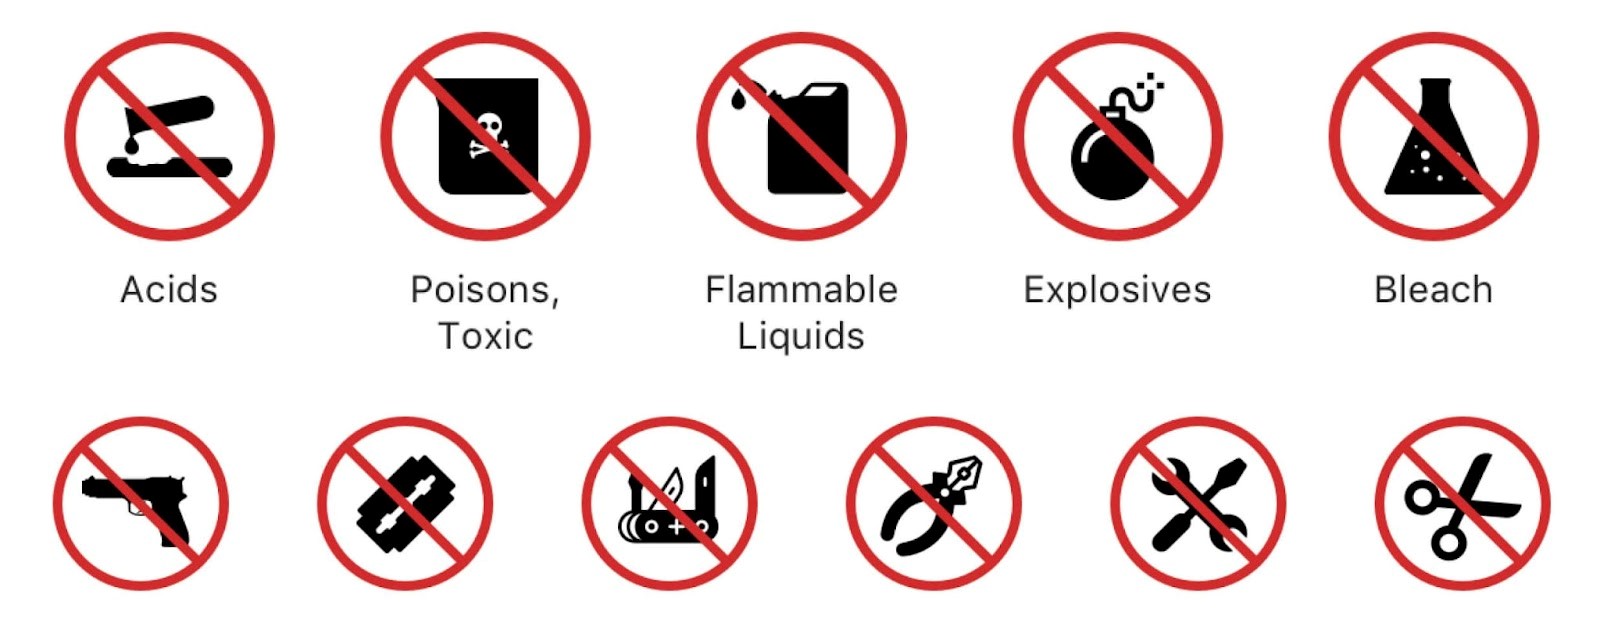 Prohibited items are not allowed to be carried on board 